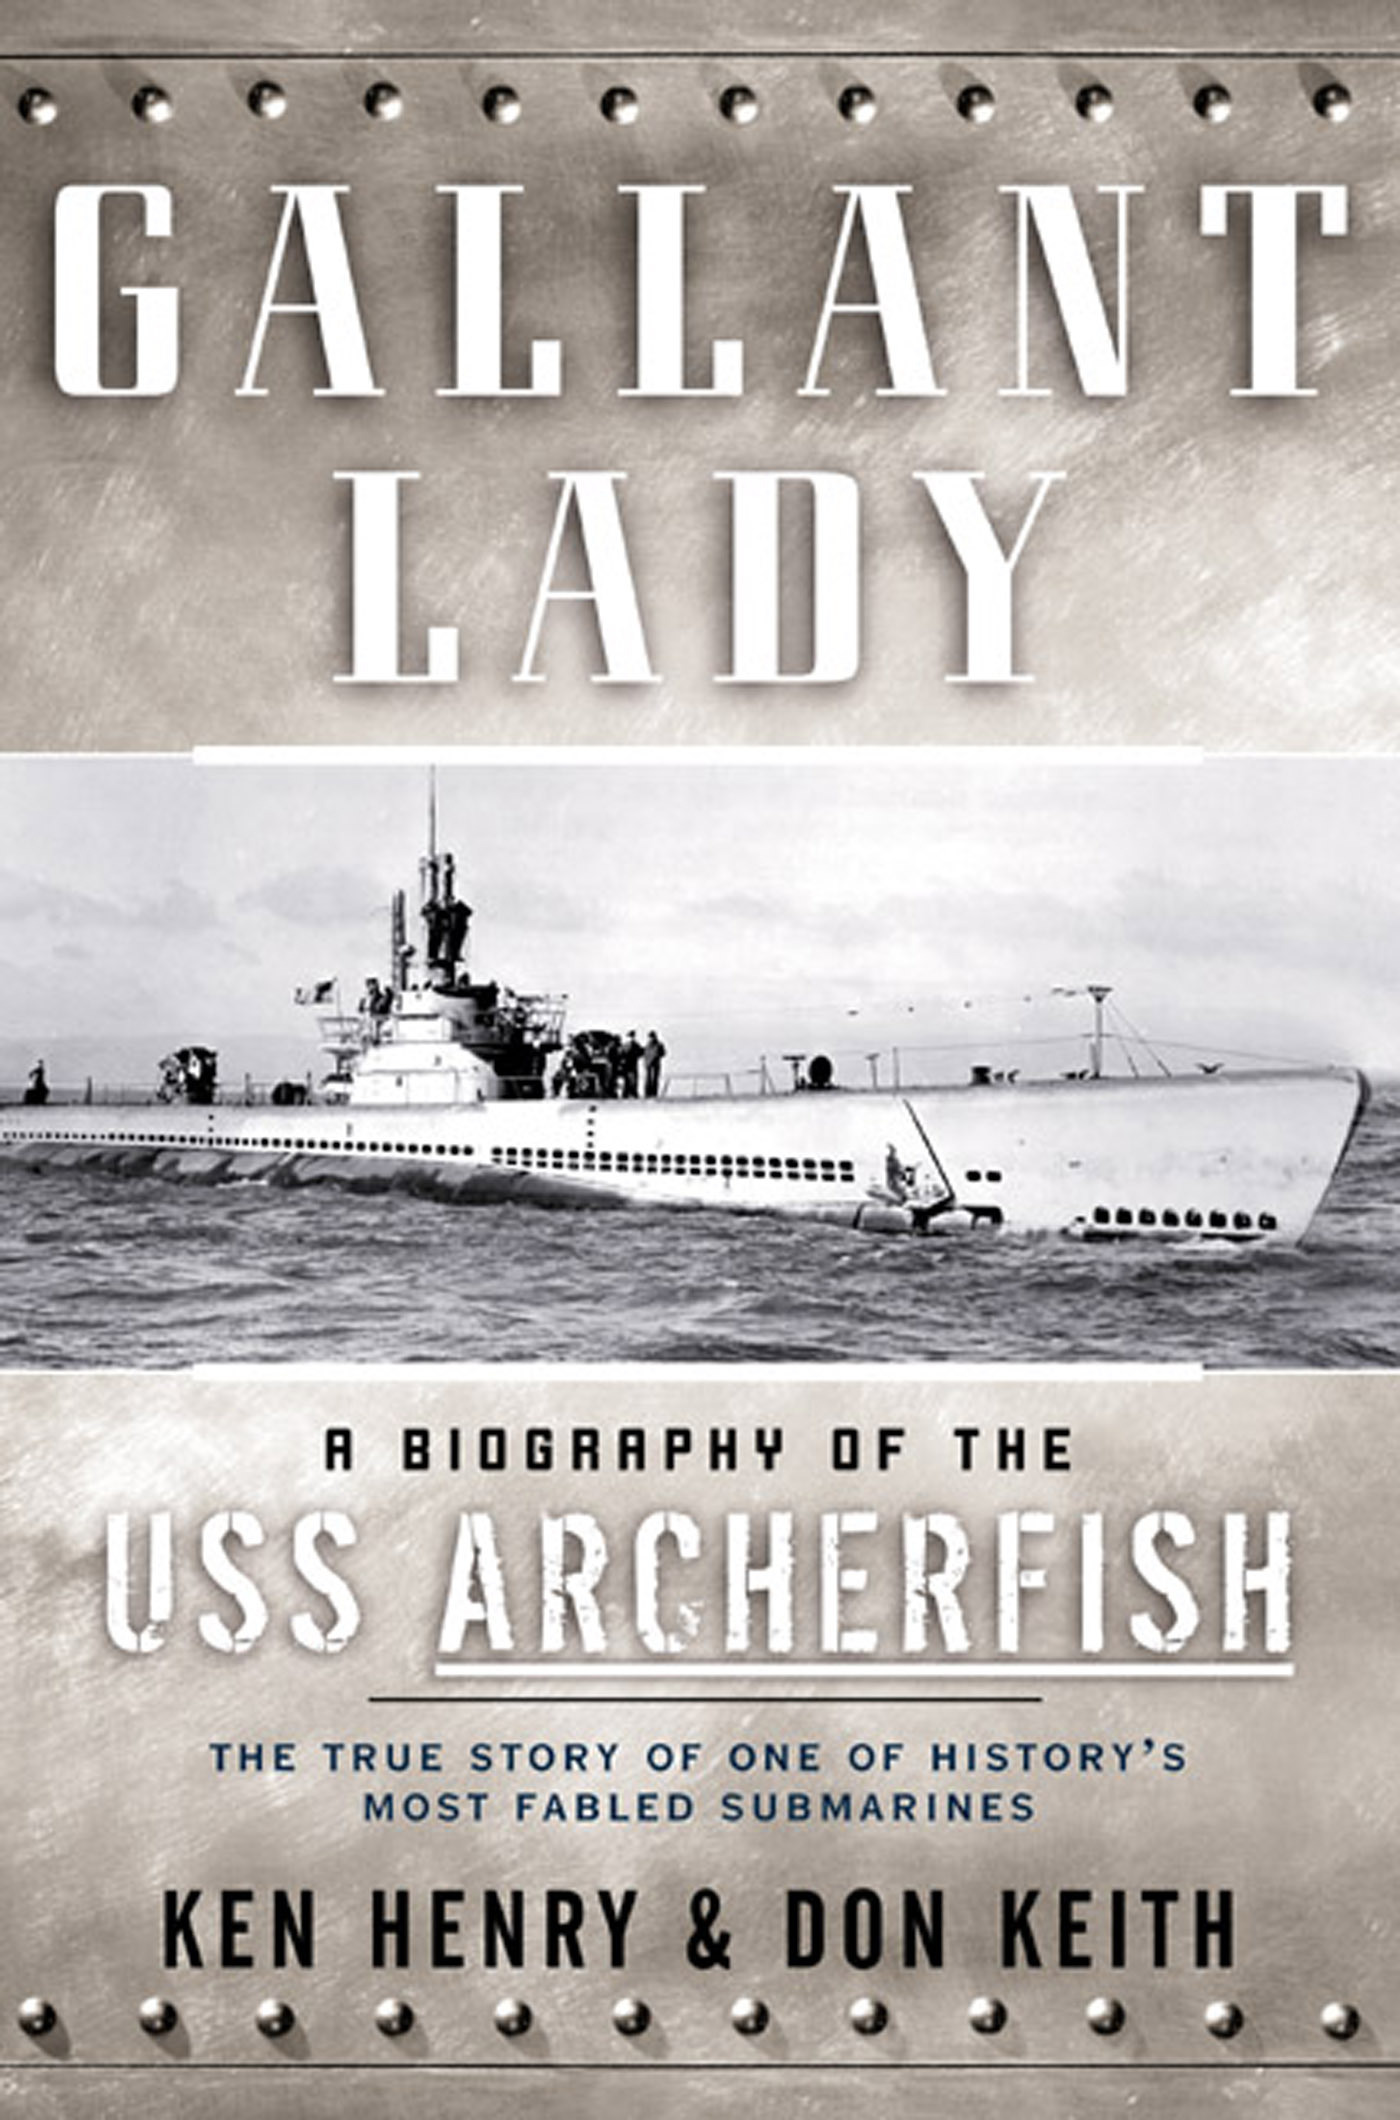 Gallant Lady : A Biography of the USS Archerfish by Don Keith, Ken Henry